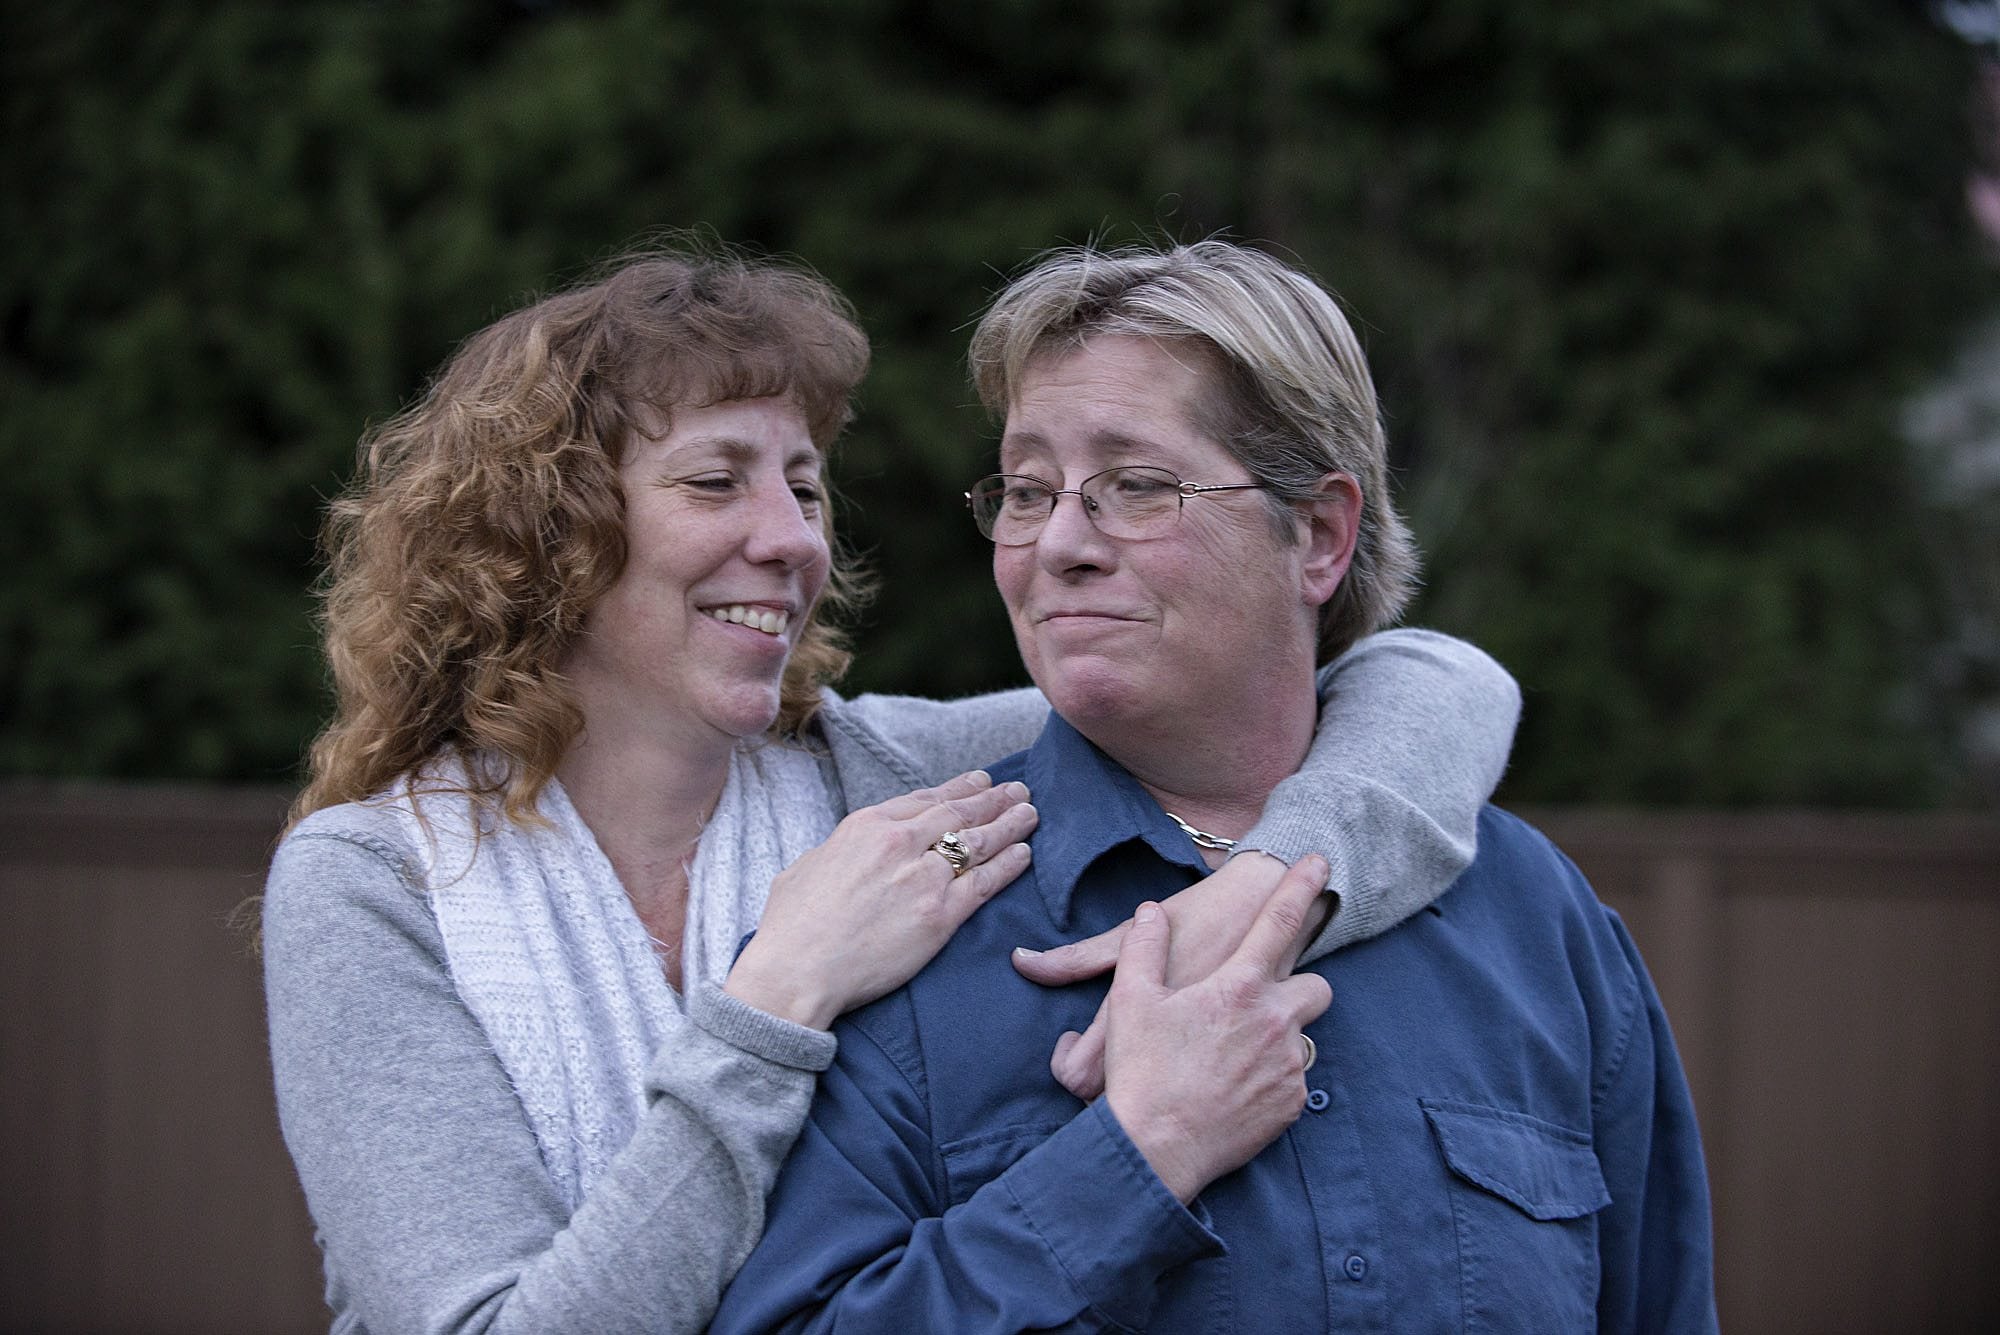 Leanne Hall, left, and her wife, Lana Hall, of Vancouver have been together 24 years. Two years ago, Lana nearly died after an aneurysm ruptured while she was working in the yard.